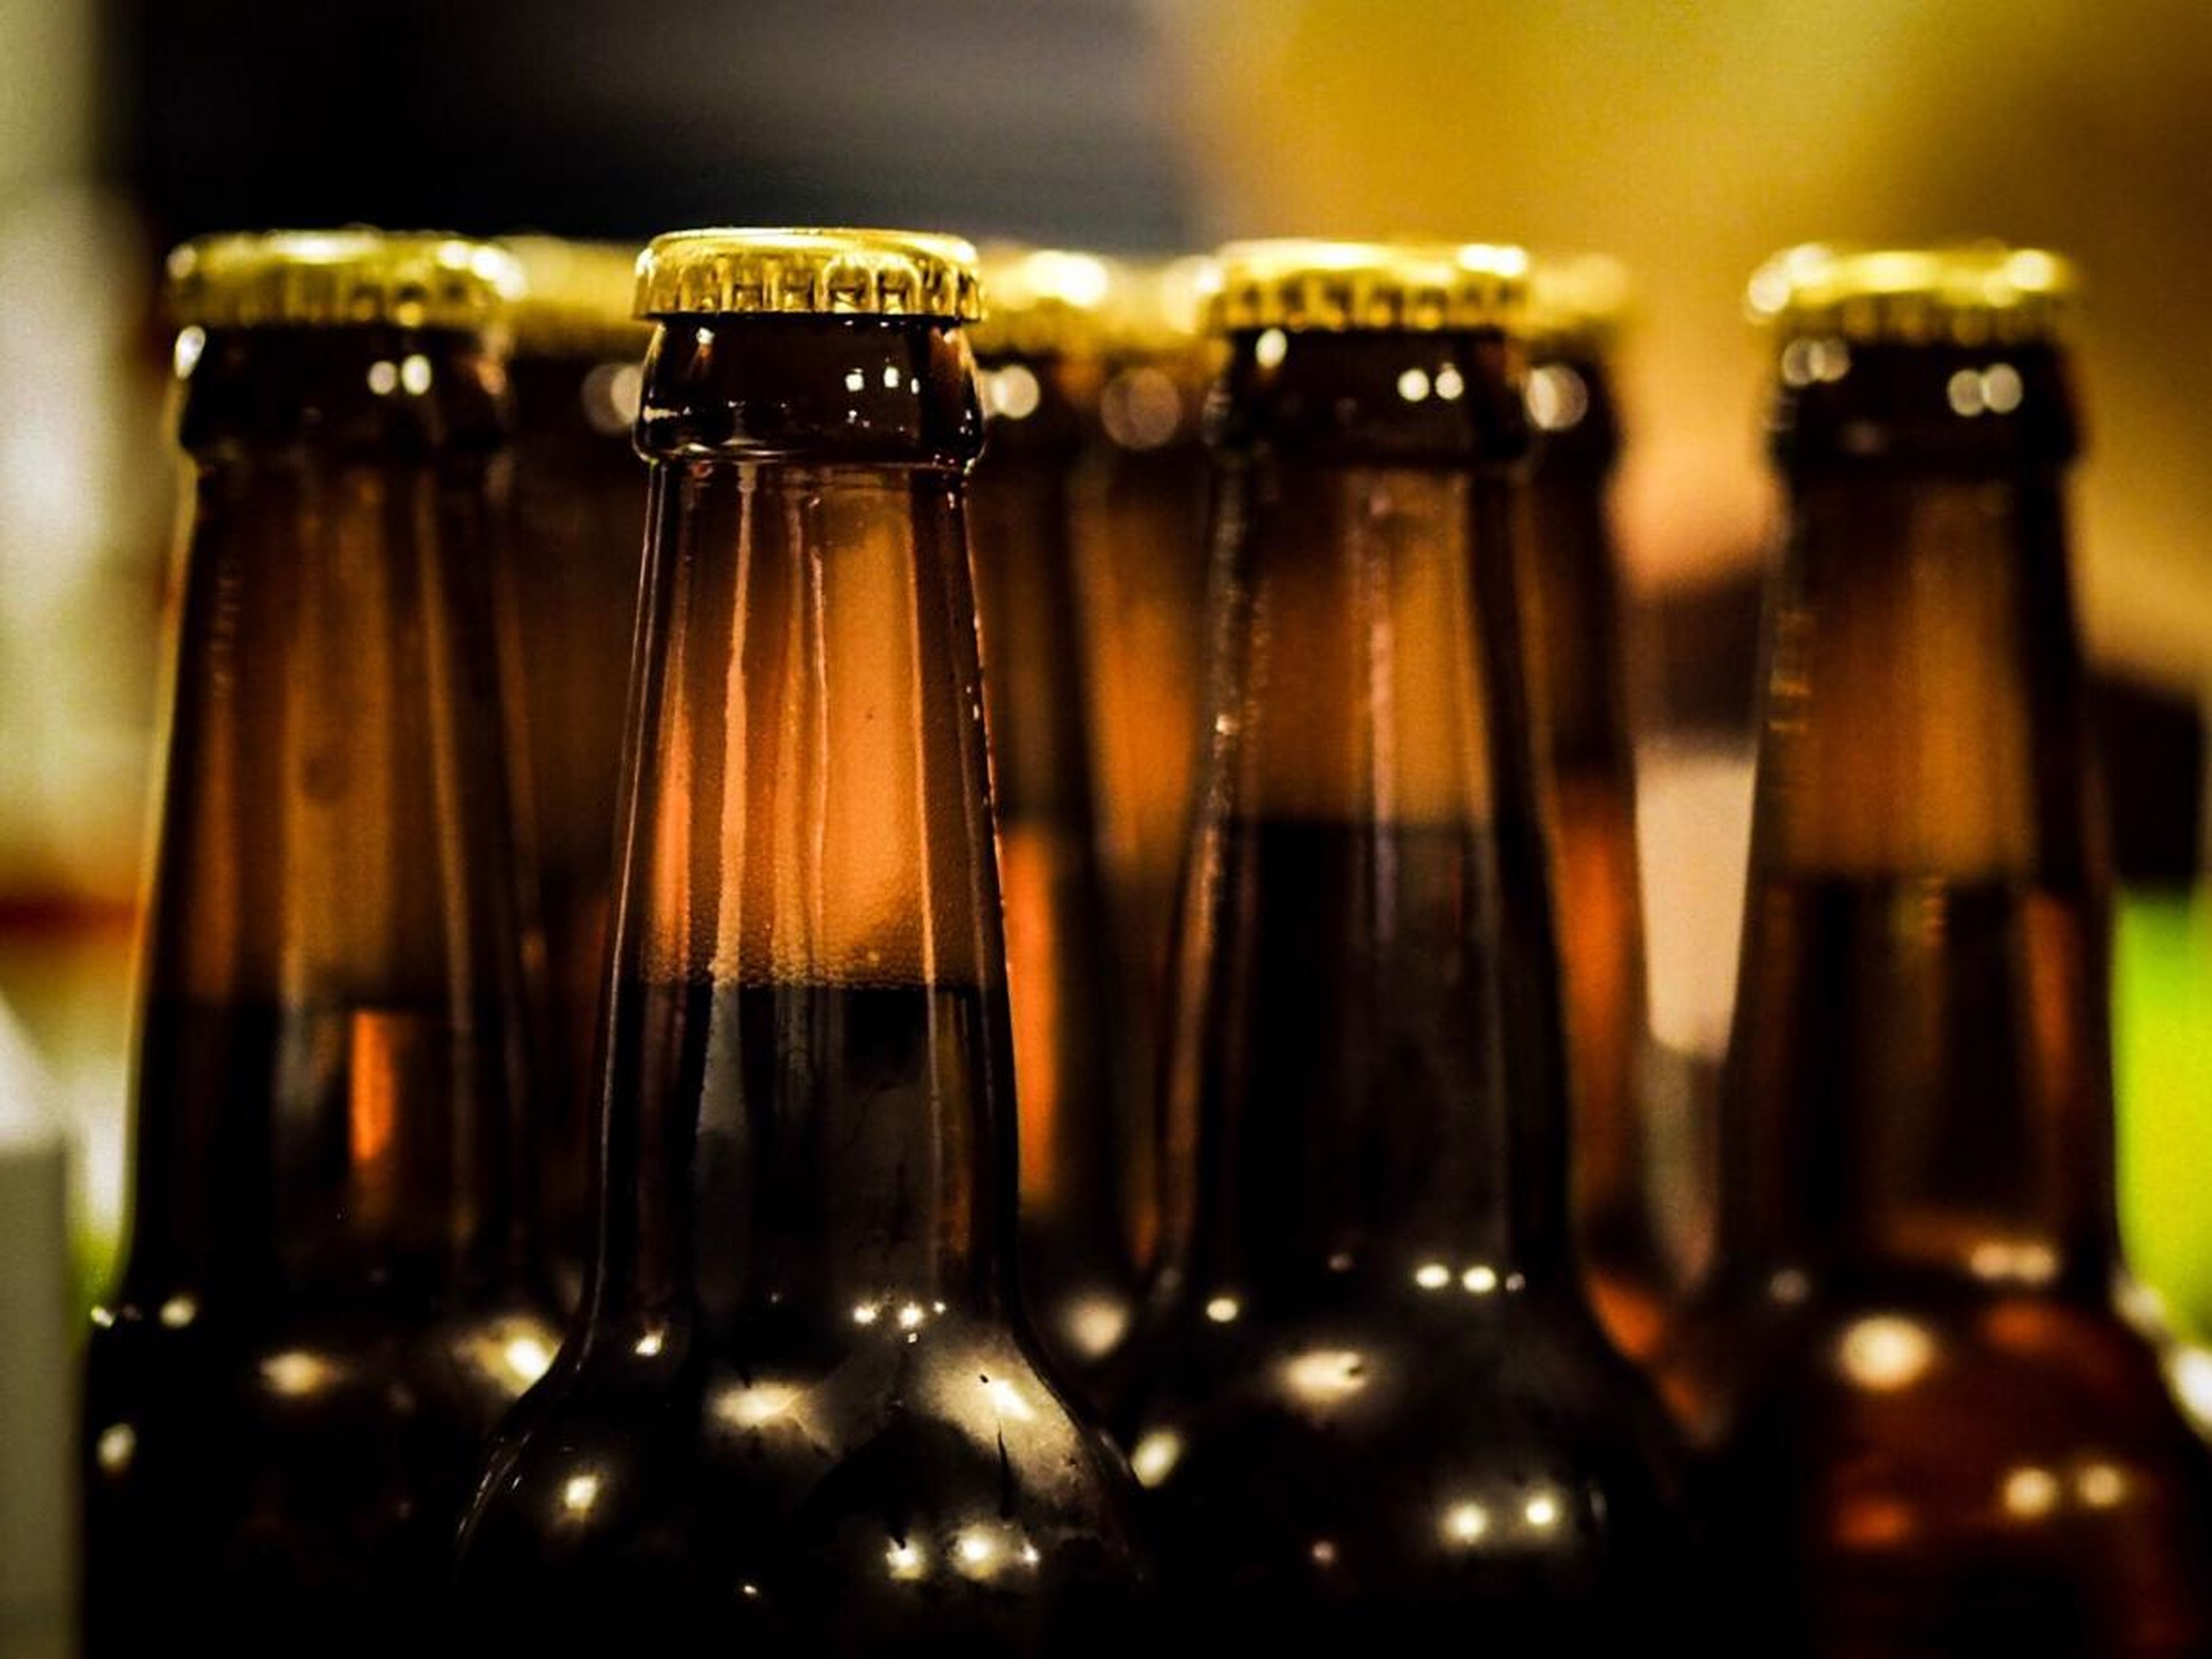 A Canadian man sent in his résumé with a 4-pack of his own craft beer